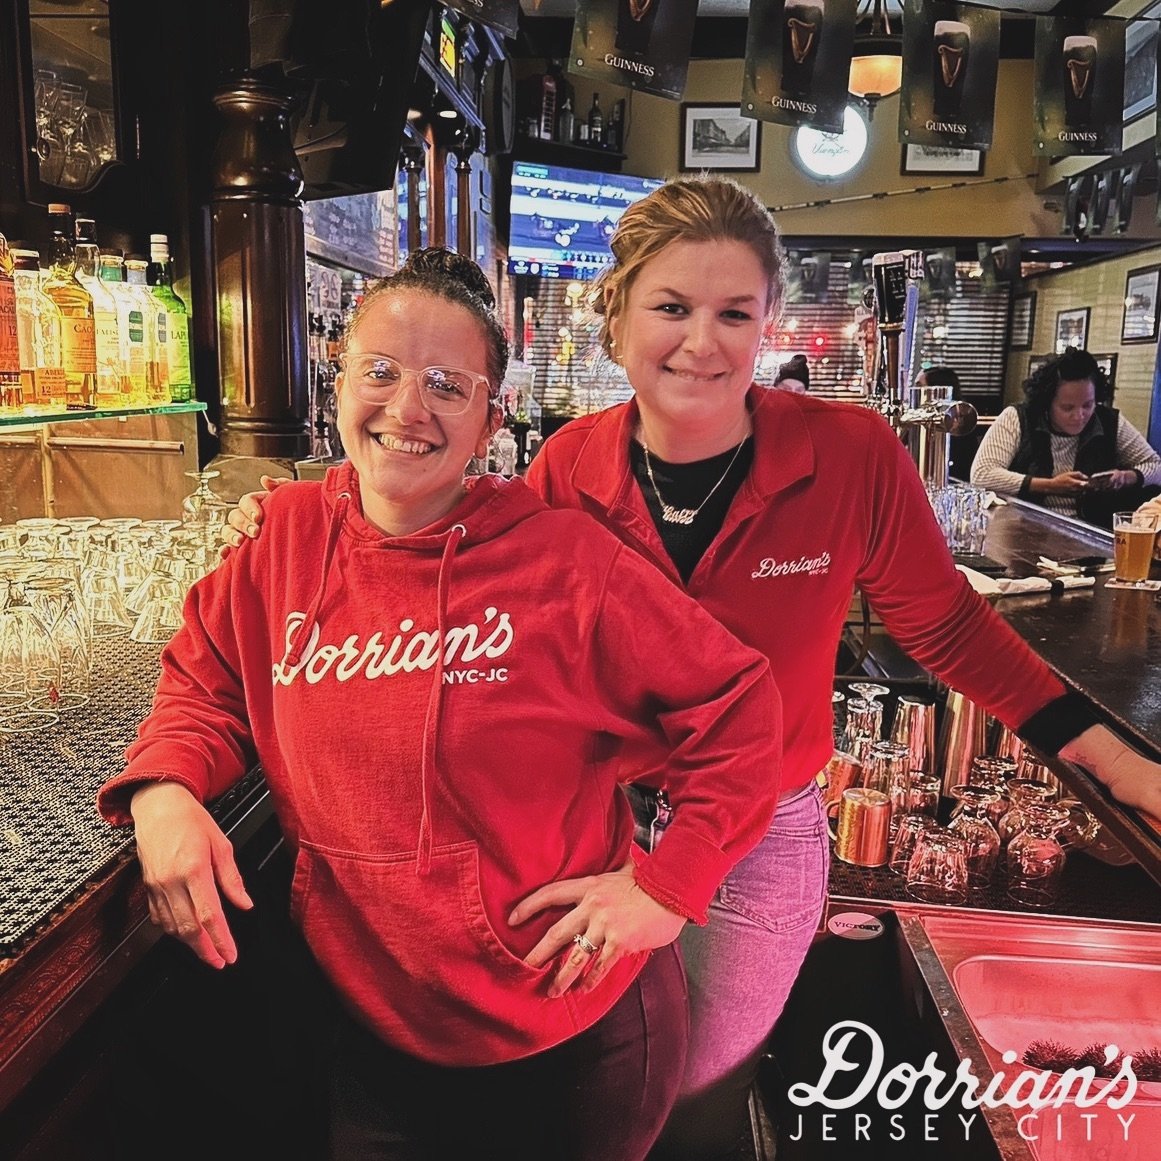 Your favorite bartenders are getting ready for the weekend. Come by to unwind with great food and drinks. Be sure to check out our new menu items online.